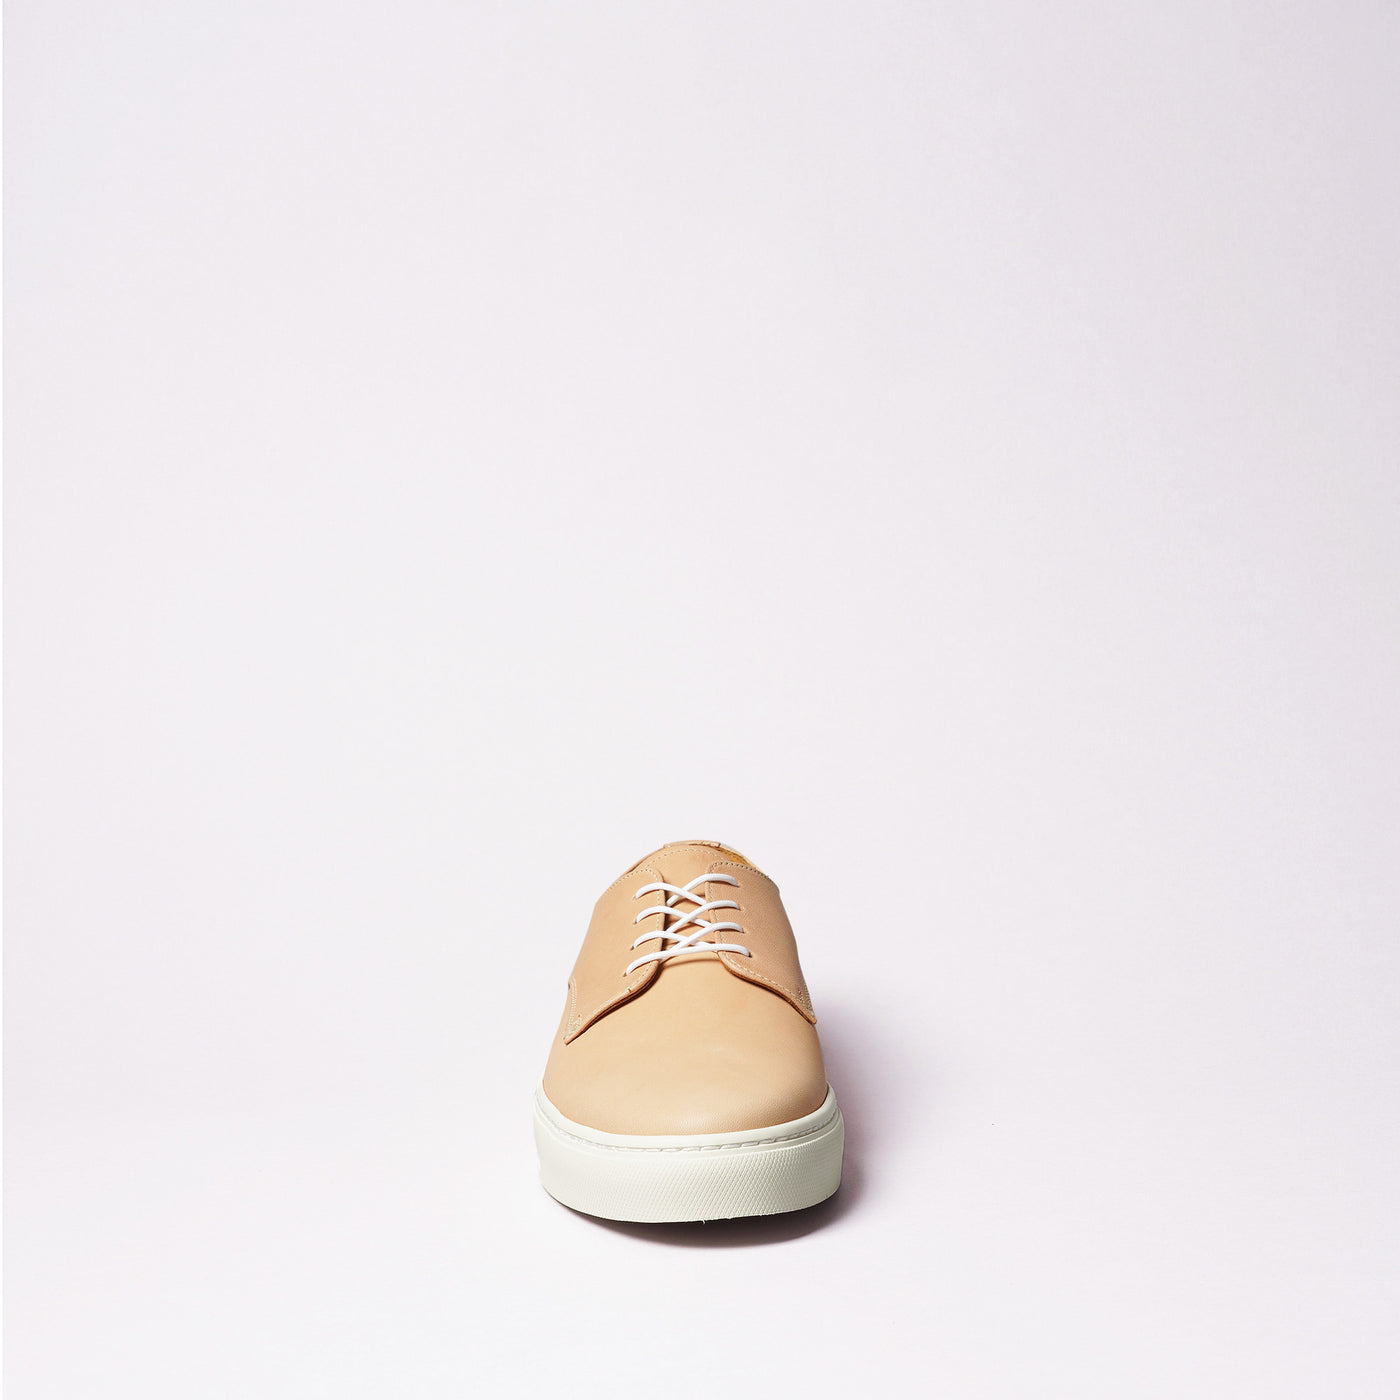 <TOSS> Bath Bath Lace-up Leather Sneaker Tochigi Tanned Leather/Brown